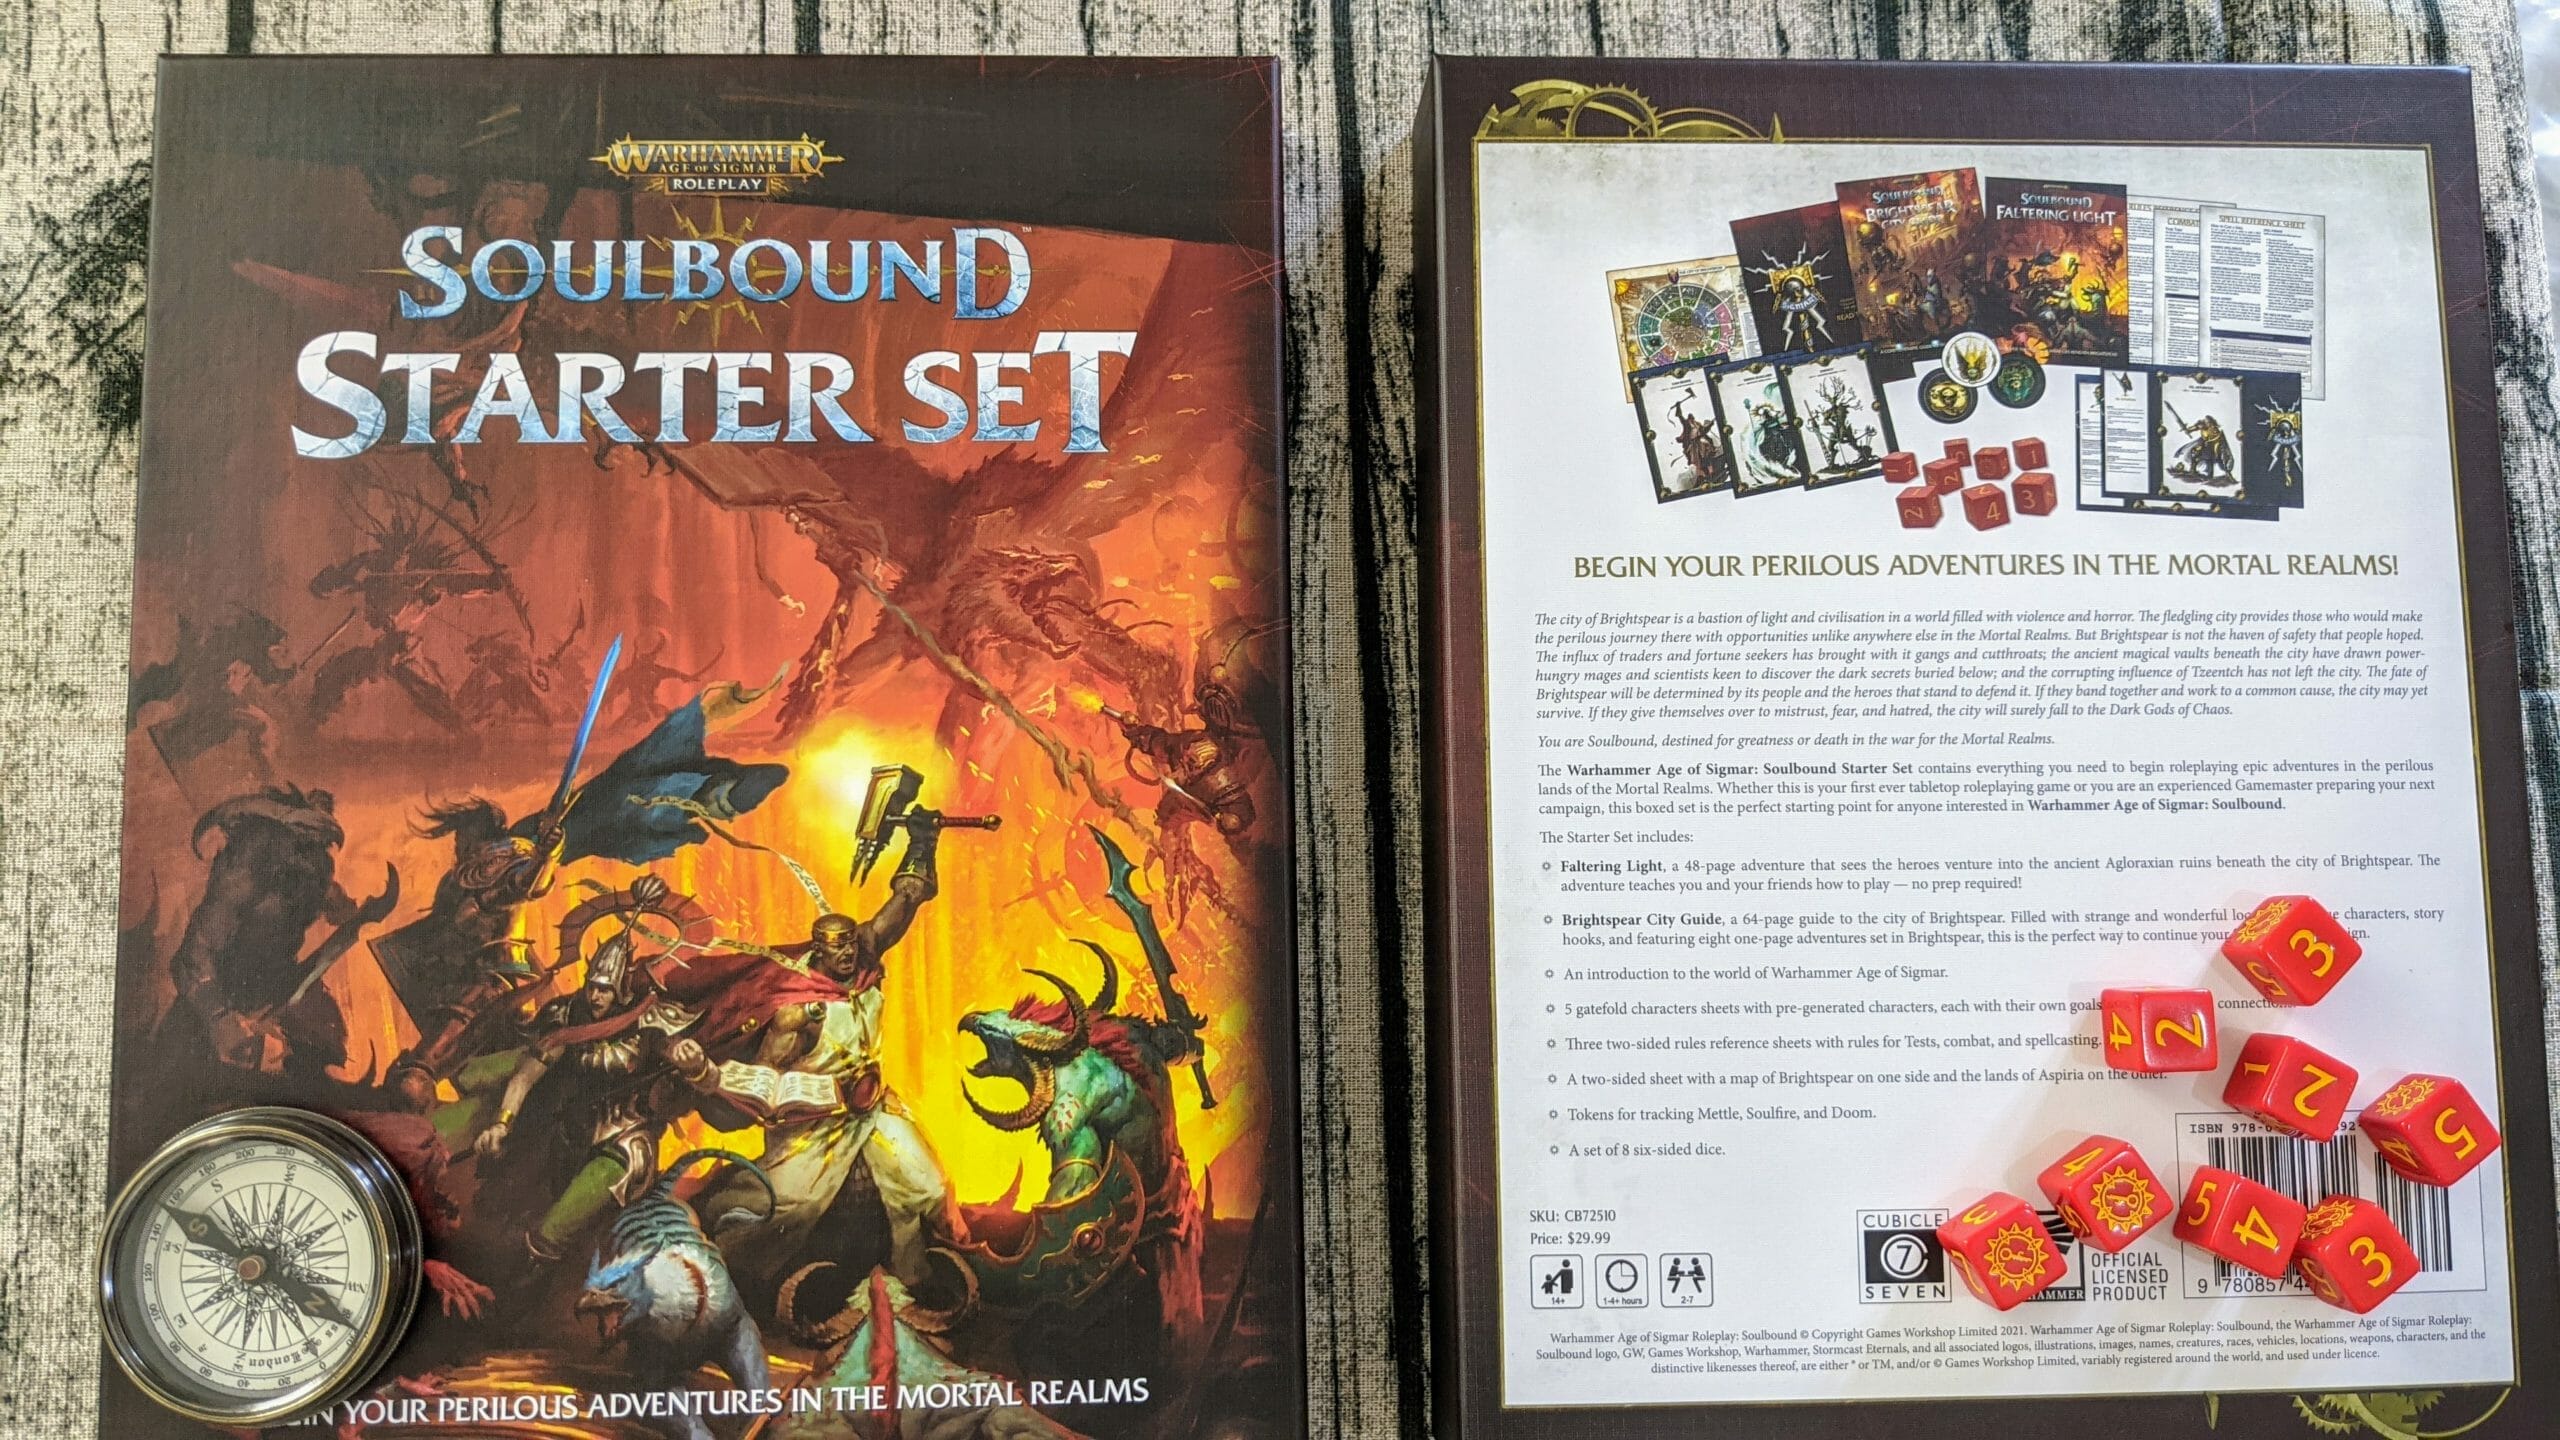 Soulbound Starter Set box covers